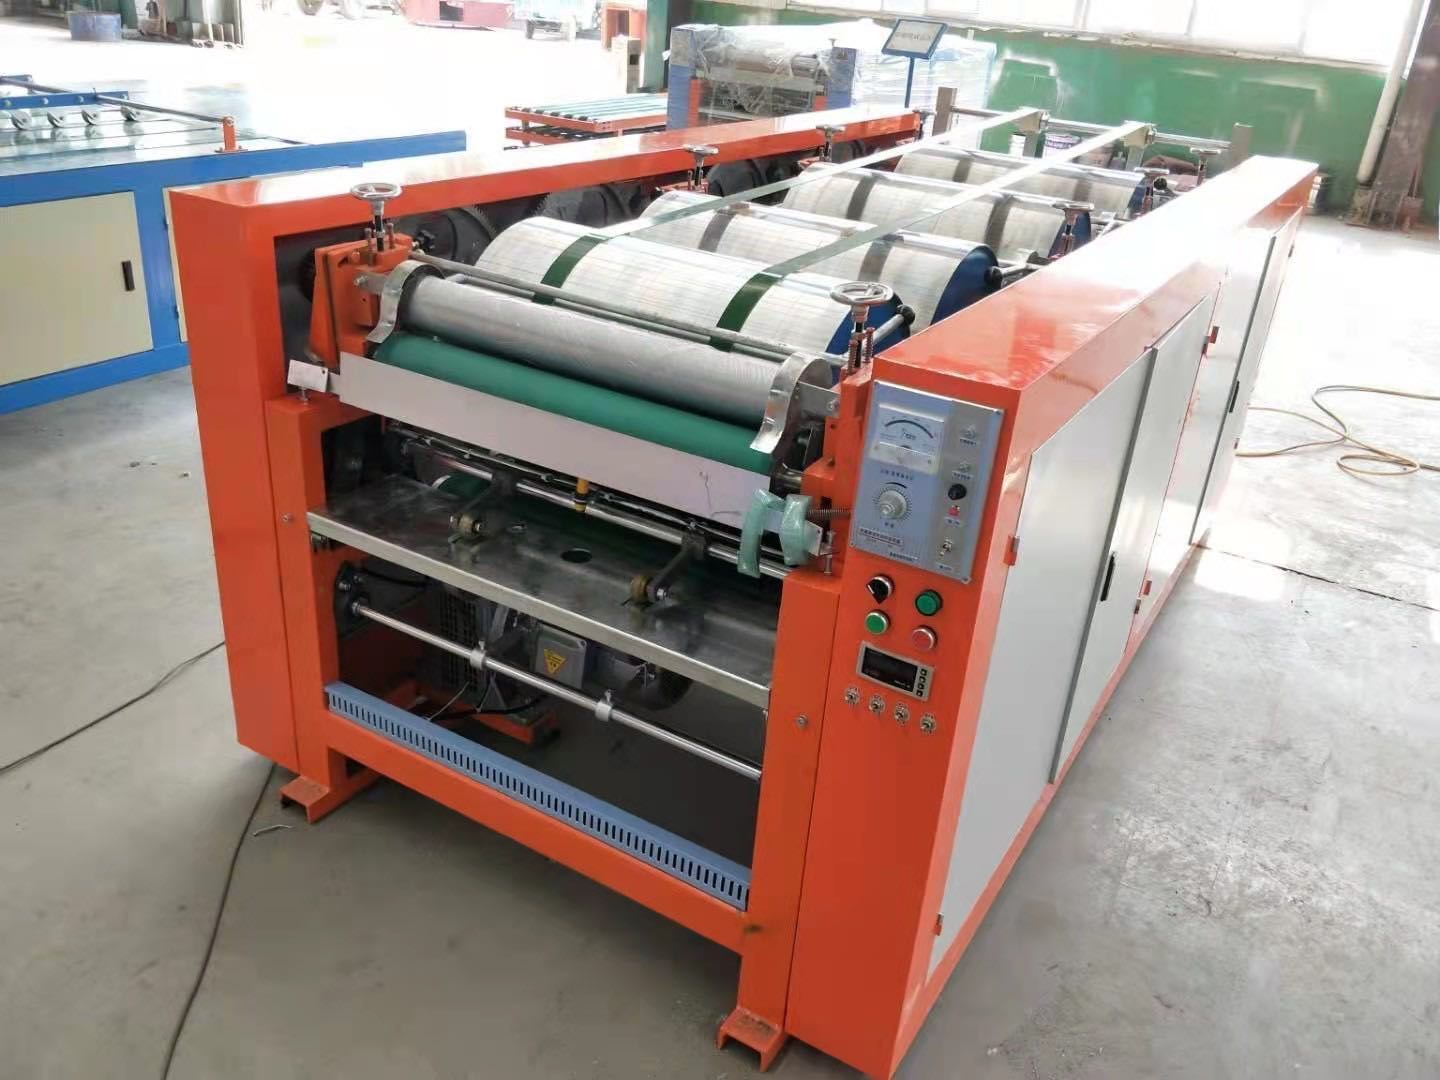 China Lowest Price for Jumbo Bag Printing Machine - FIBC Jumbo Bag Big Bag Printing Machine - VYT factory and manufacturers | VYT detail pictures